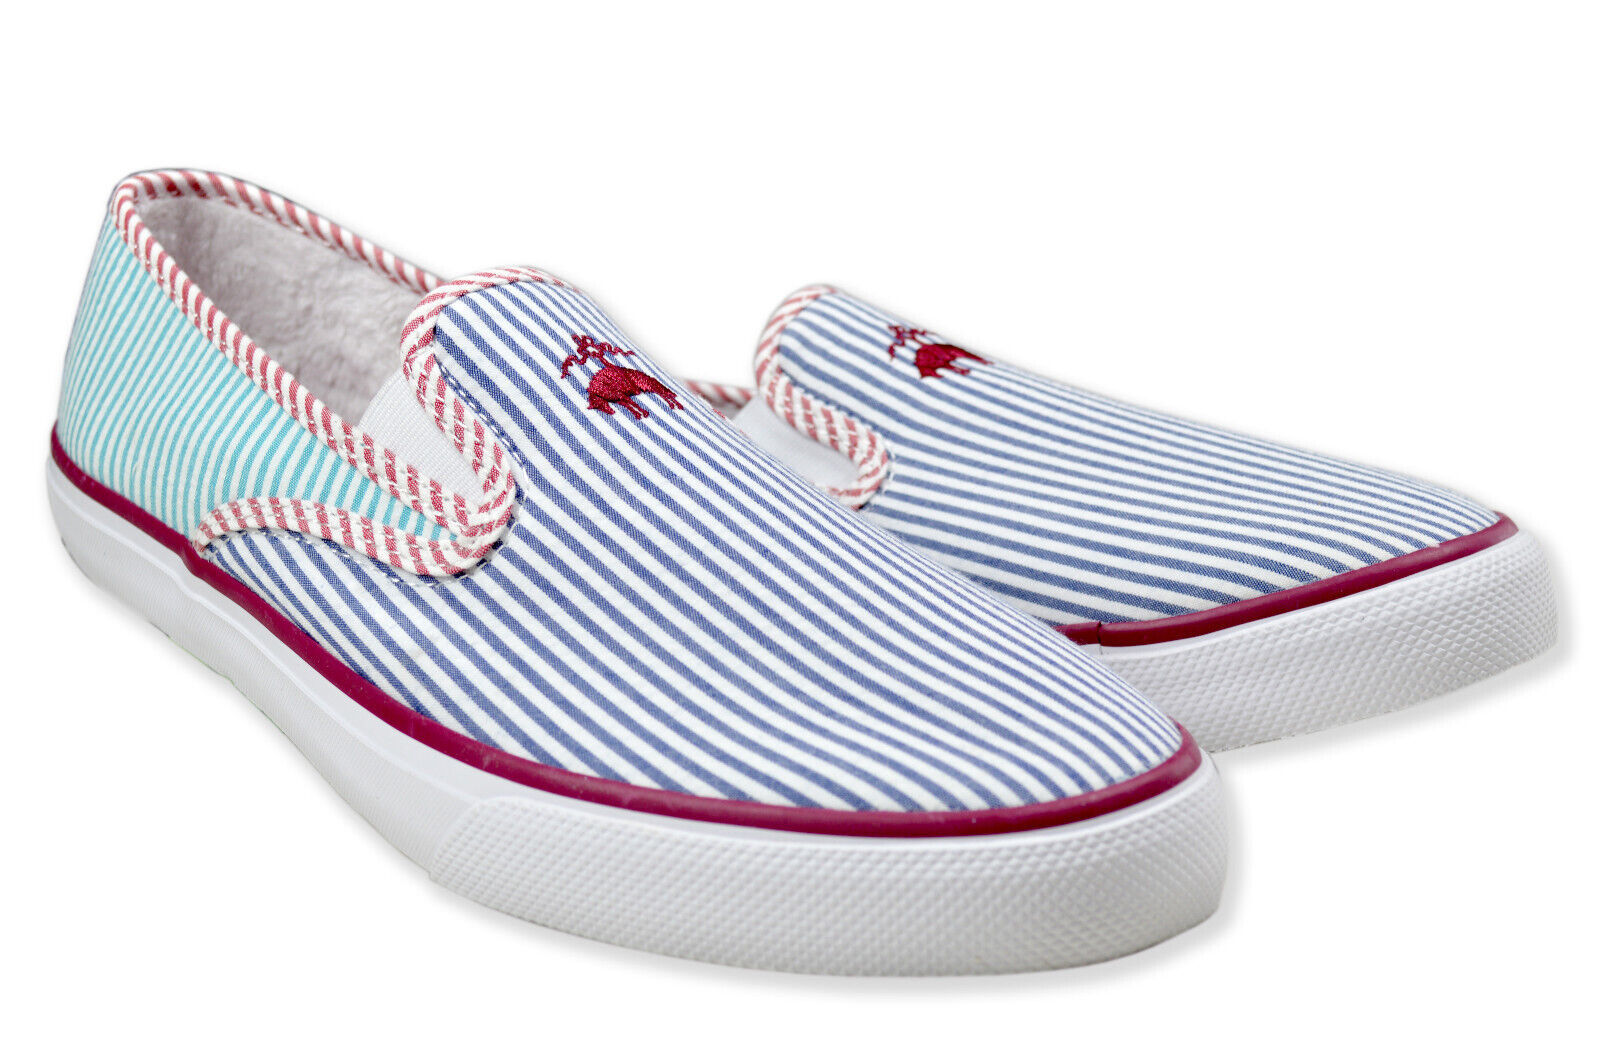 Brooks Brothers Sperry White Multi Striped Canvas Slip On Sneakers, 12 M 8418-9 - $108.90